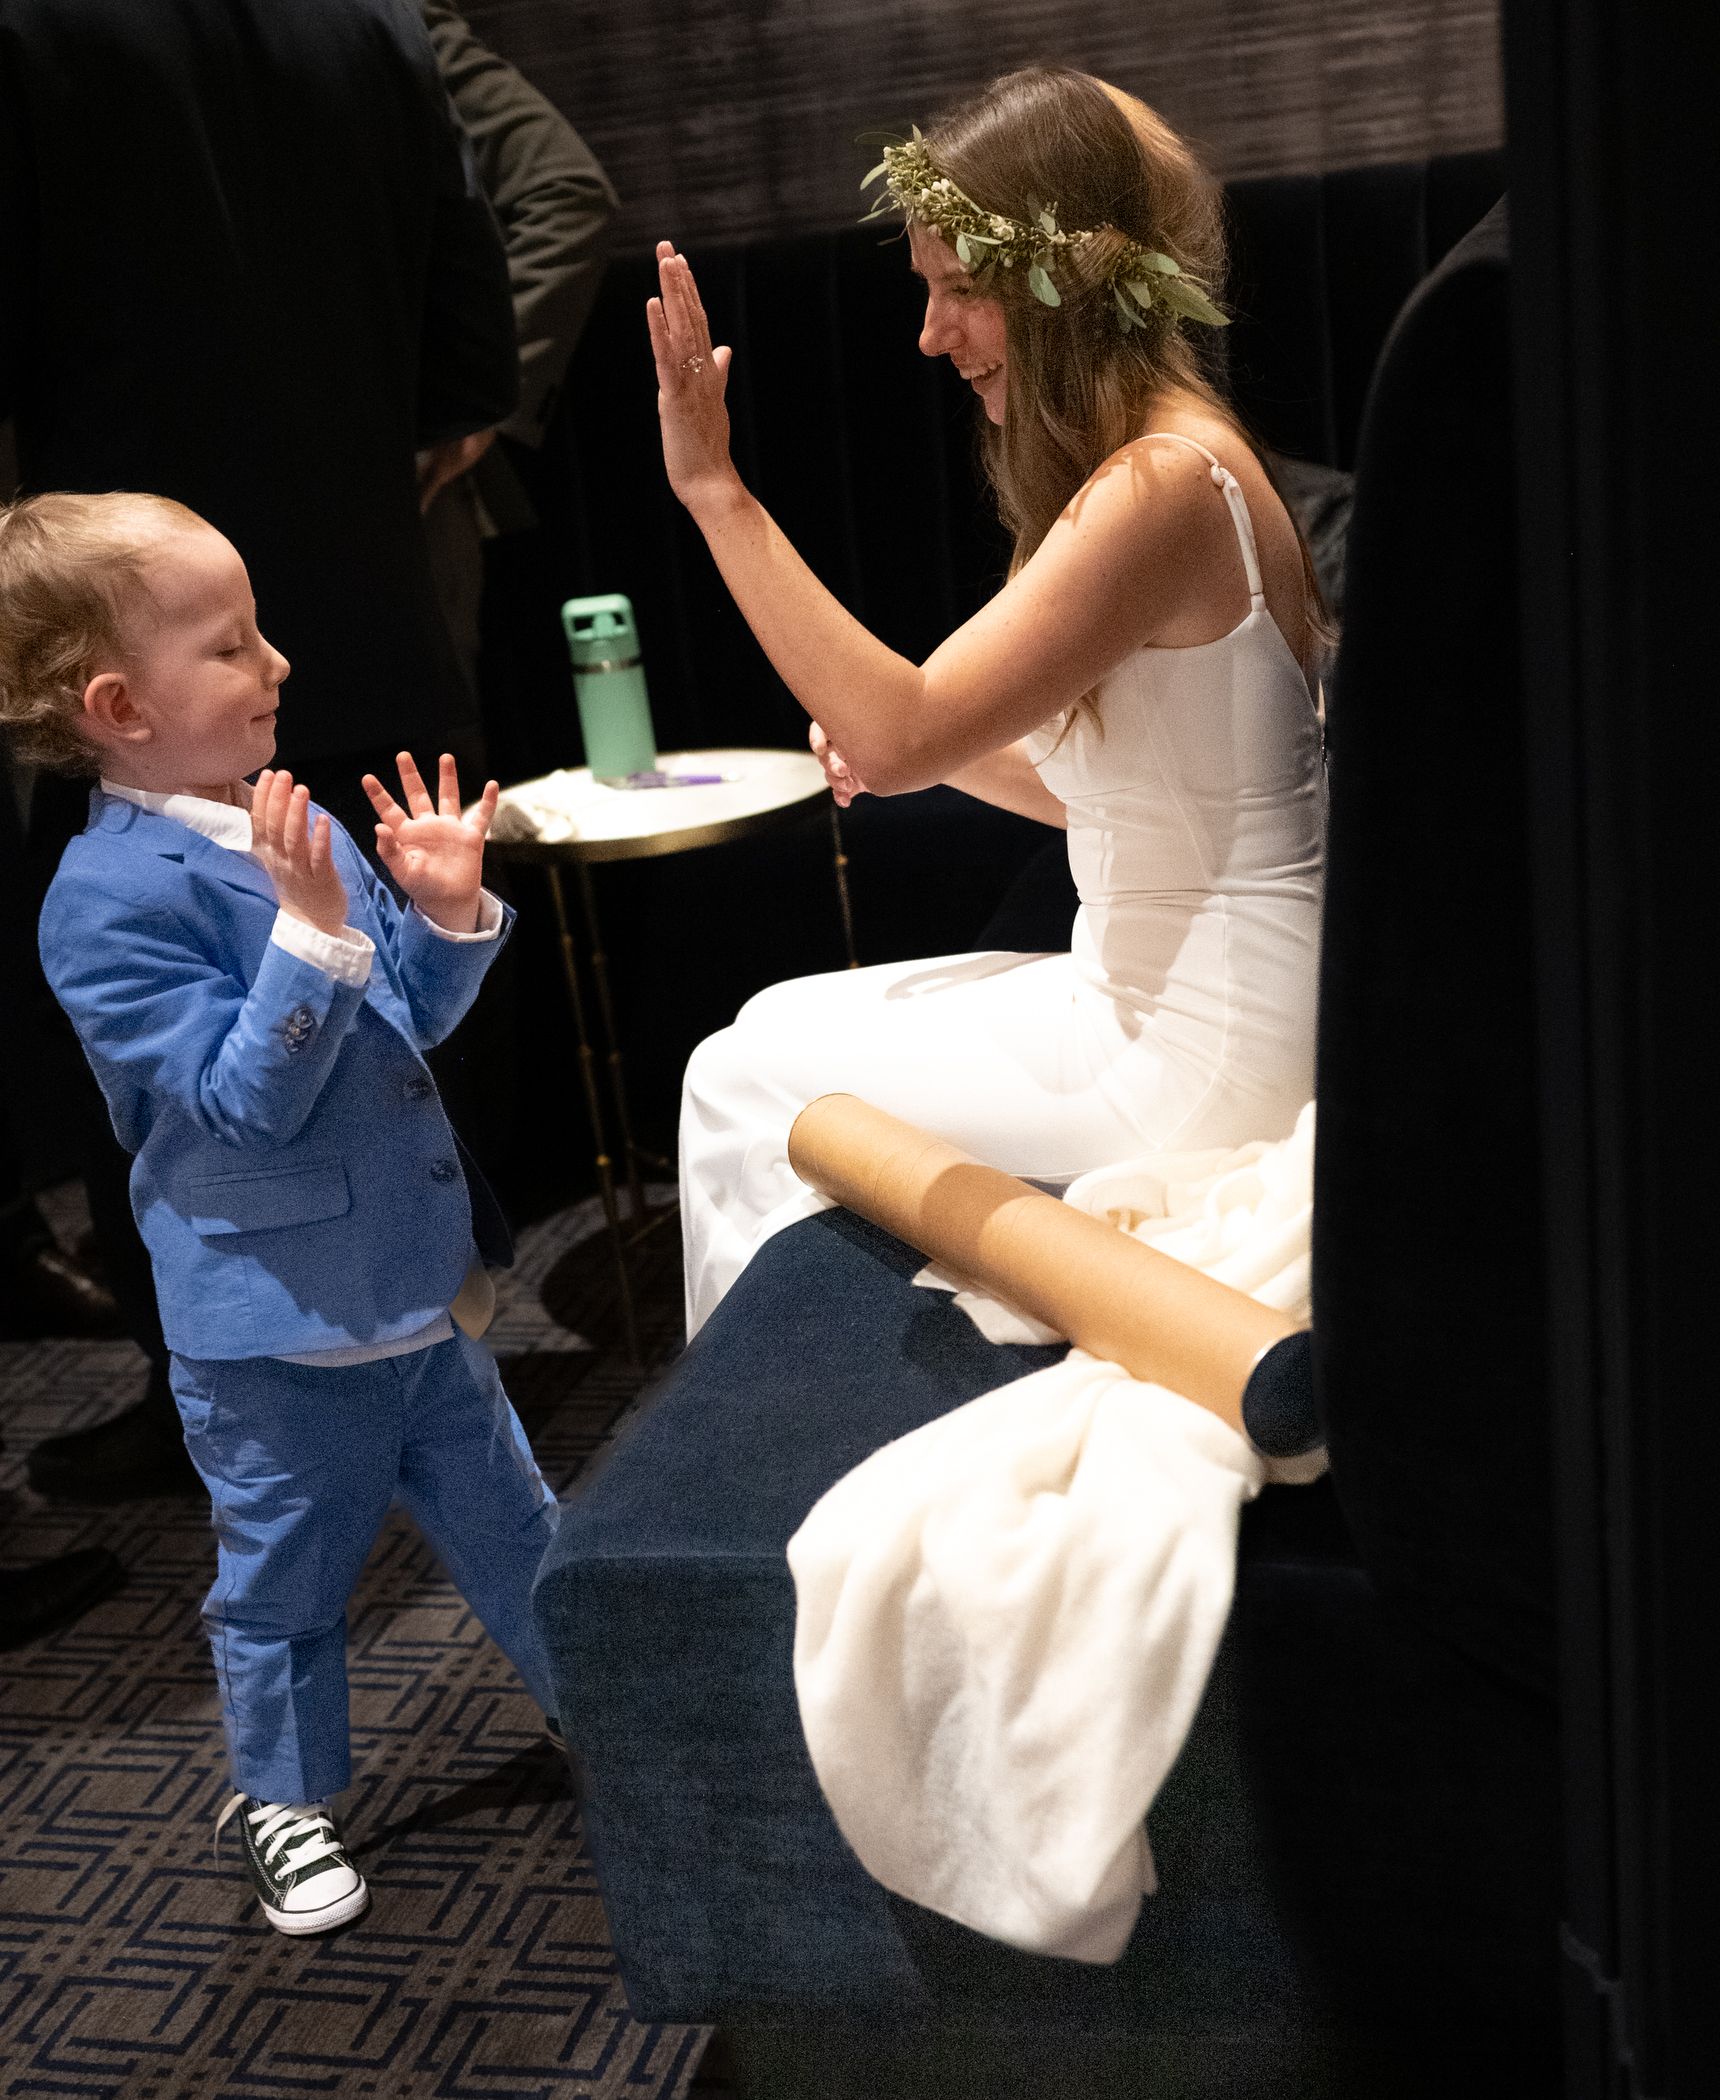 The Bride and Her Ring Bearer